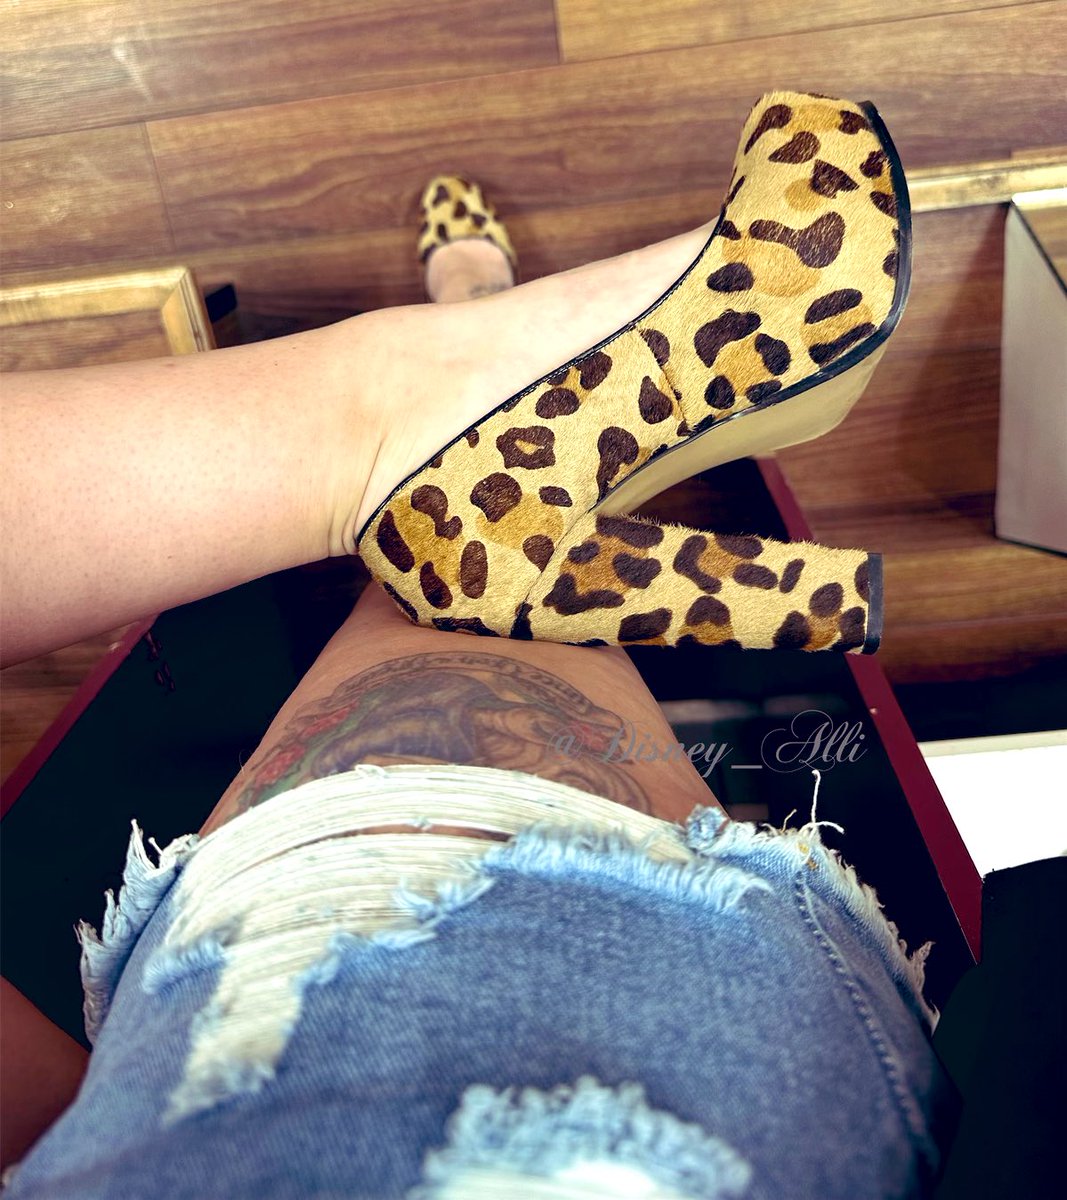 It was leopard print @stevemadden today #shoes #shoefie #shoesoftheday #sotd #outfitoftheday #ootd #highheeledshoes #pumps #highheellife #highheellover #highheeladdict #shoelover #shoefreak #shoeporn #shoewhore #shoeaddict #shoeaholic #shoeaddiction #heelsporn #heels #showoff